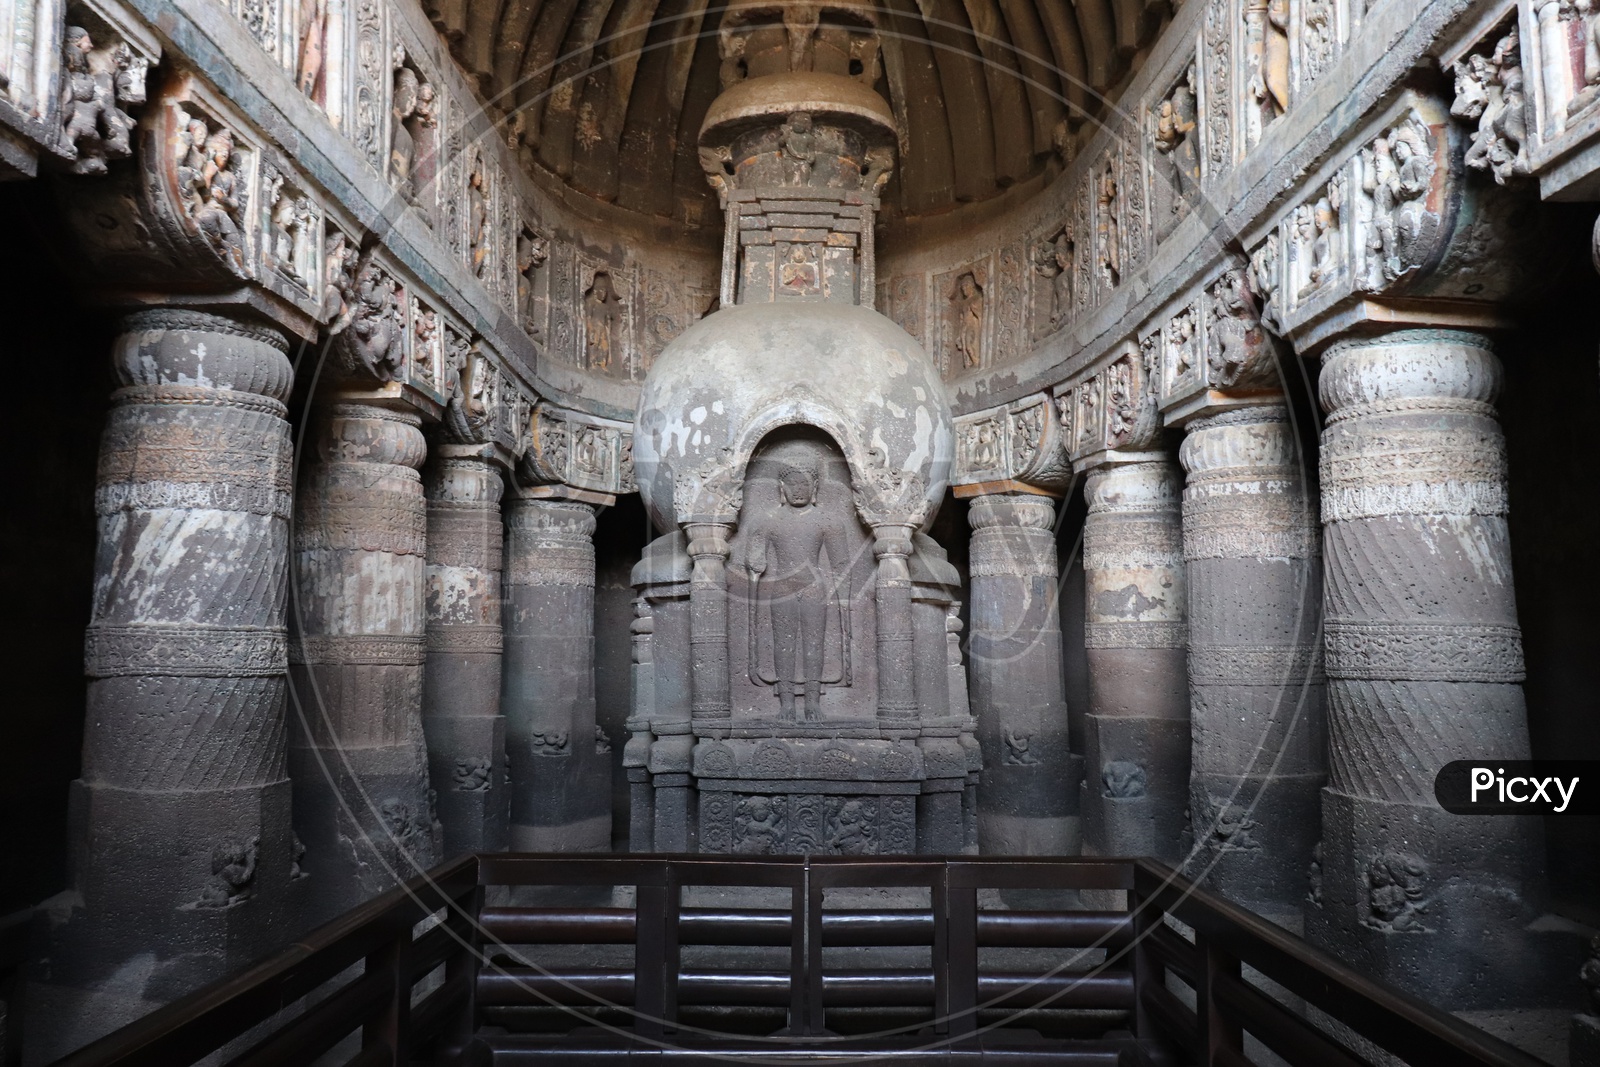 Ancient Stone Cravings of  Buddha Temples  at Ajanta Caves    Or  Tourist Attraction Of  Ancient Caves At Ajanta in Deccan Plateau